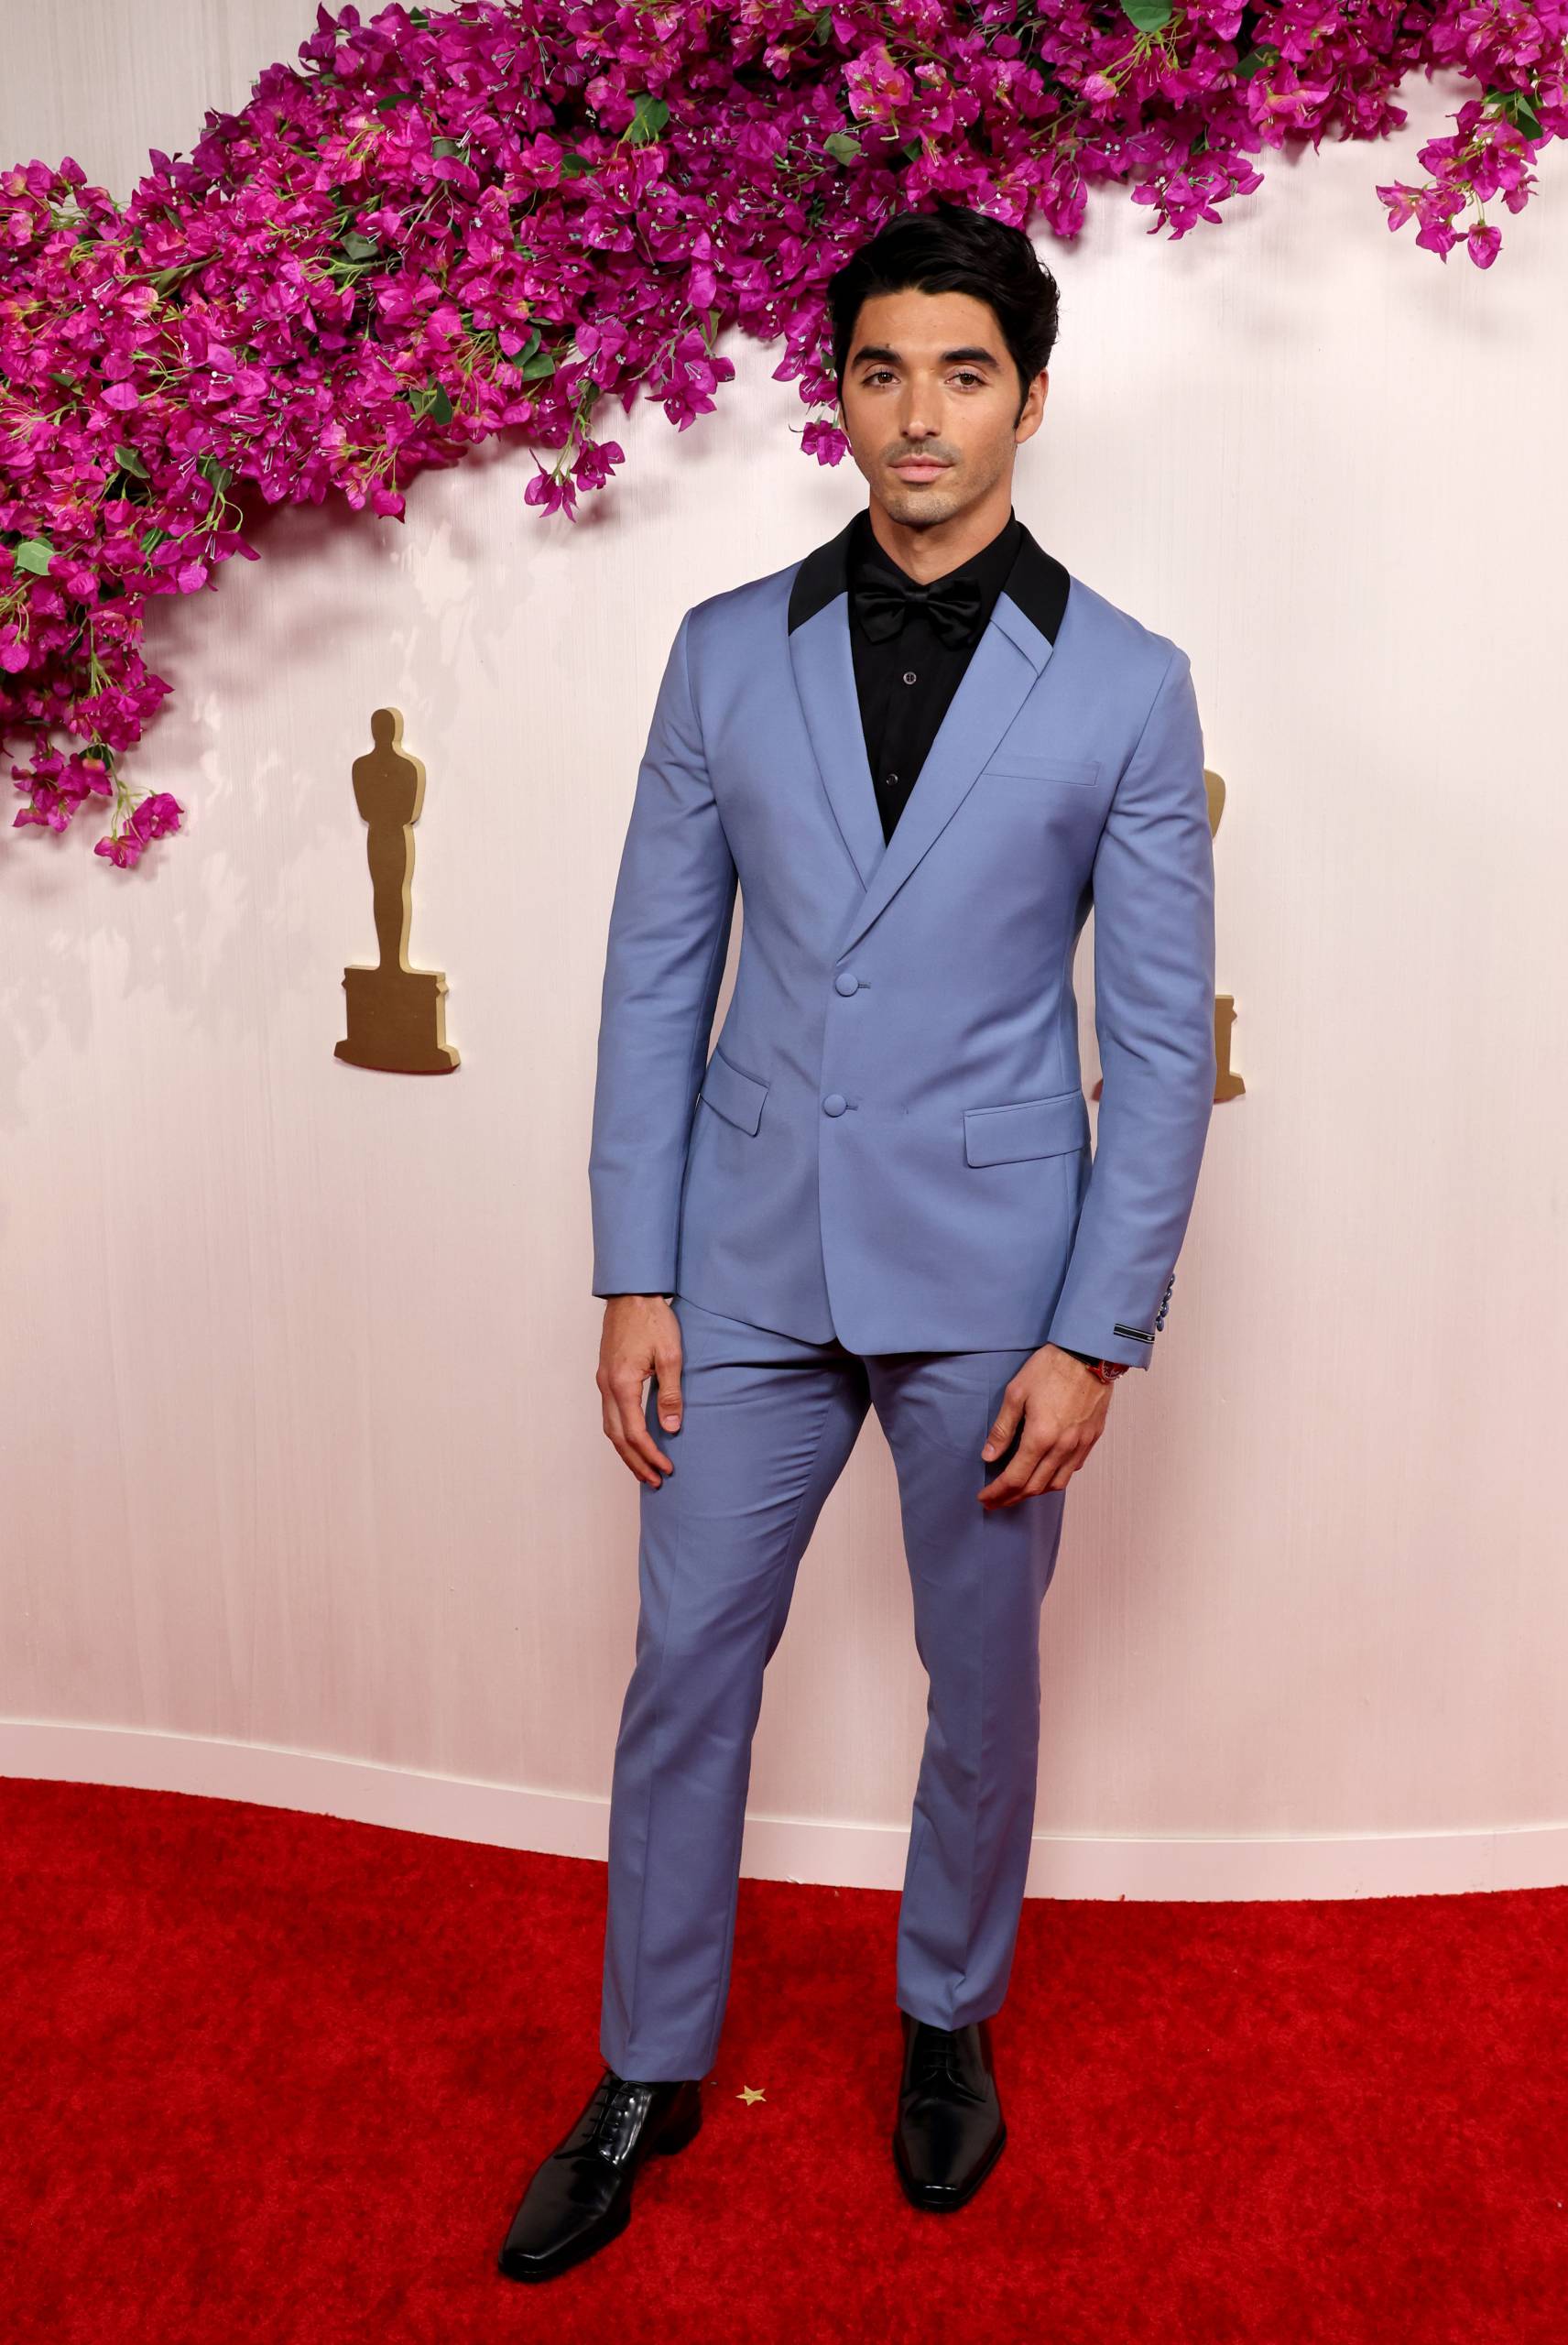 A slight man stands on a red carpet wearing black shirt and cornflower blue suit.